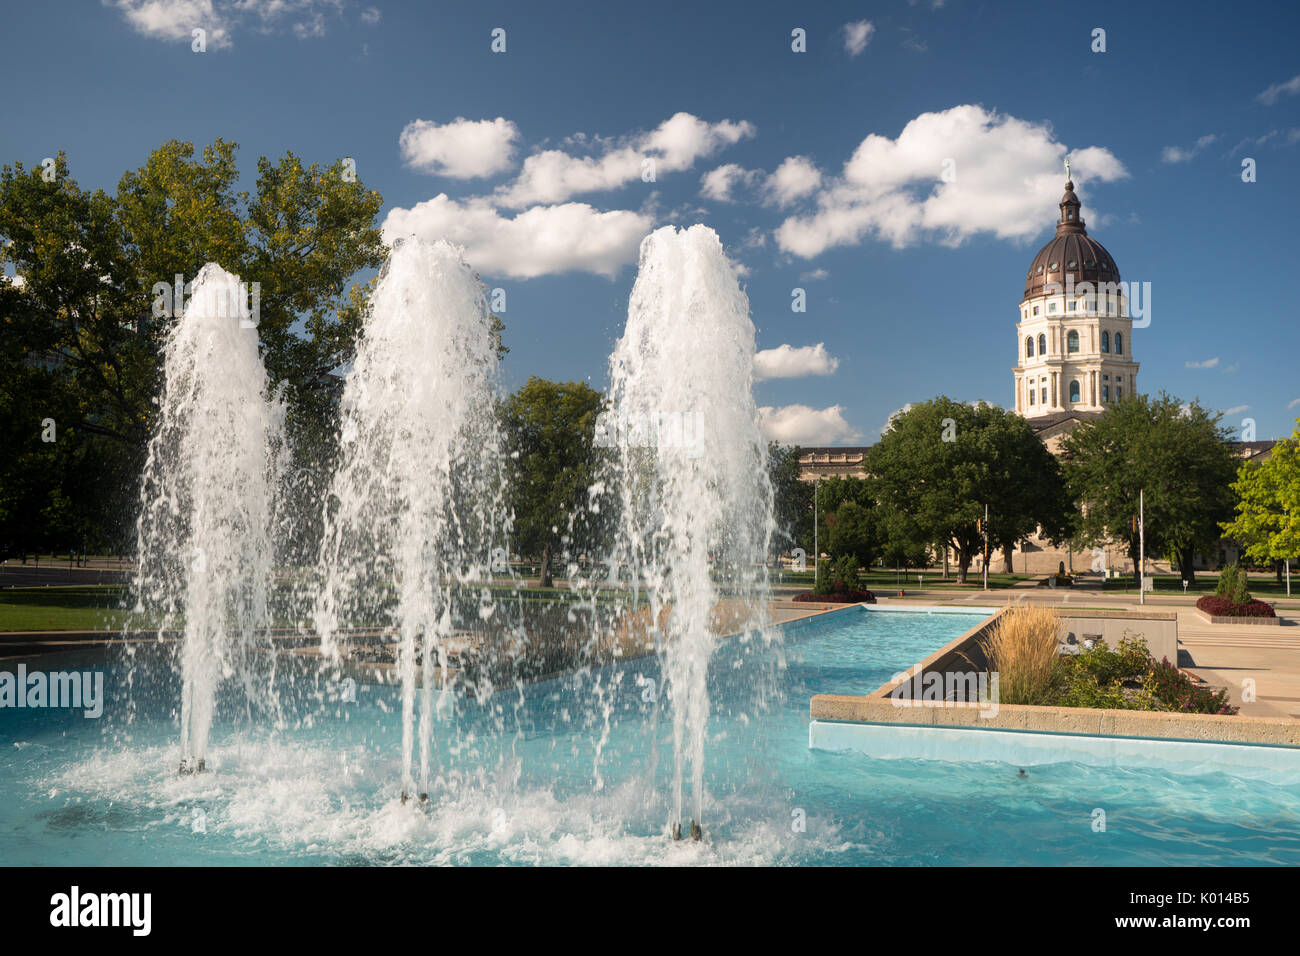 Soft clouds and blue skies appear over fountains and the capitol of Topeka, Kansas USA Stock Photo